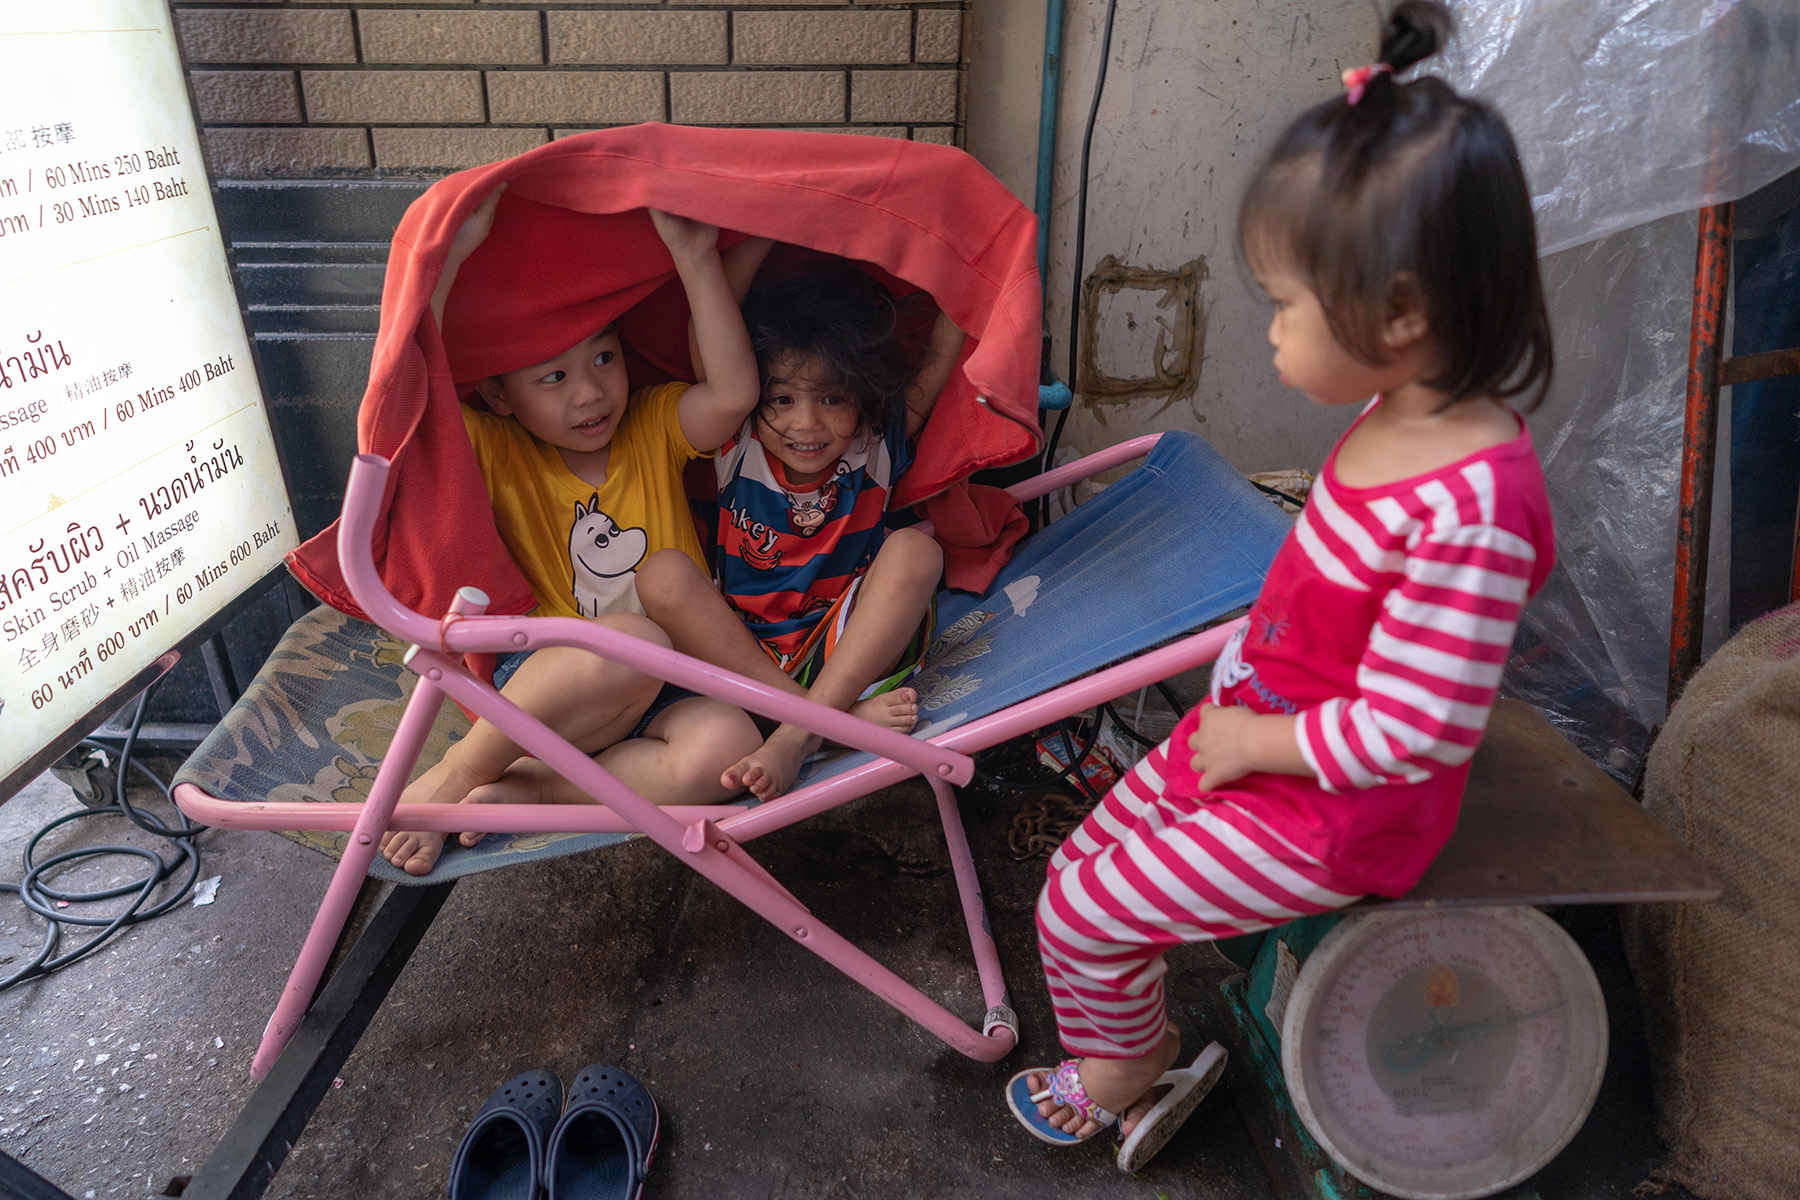 Two girls playing hide and seek to entertain a third, younger girl. In typical younger sister fashion, she is not and likely more angry she isn't allowed in the wheelbarrow.